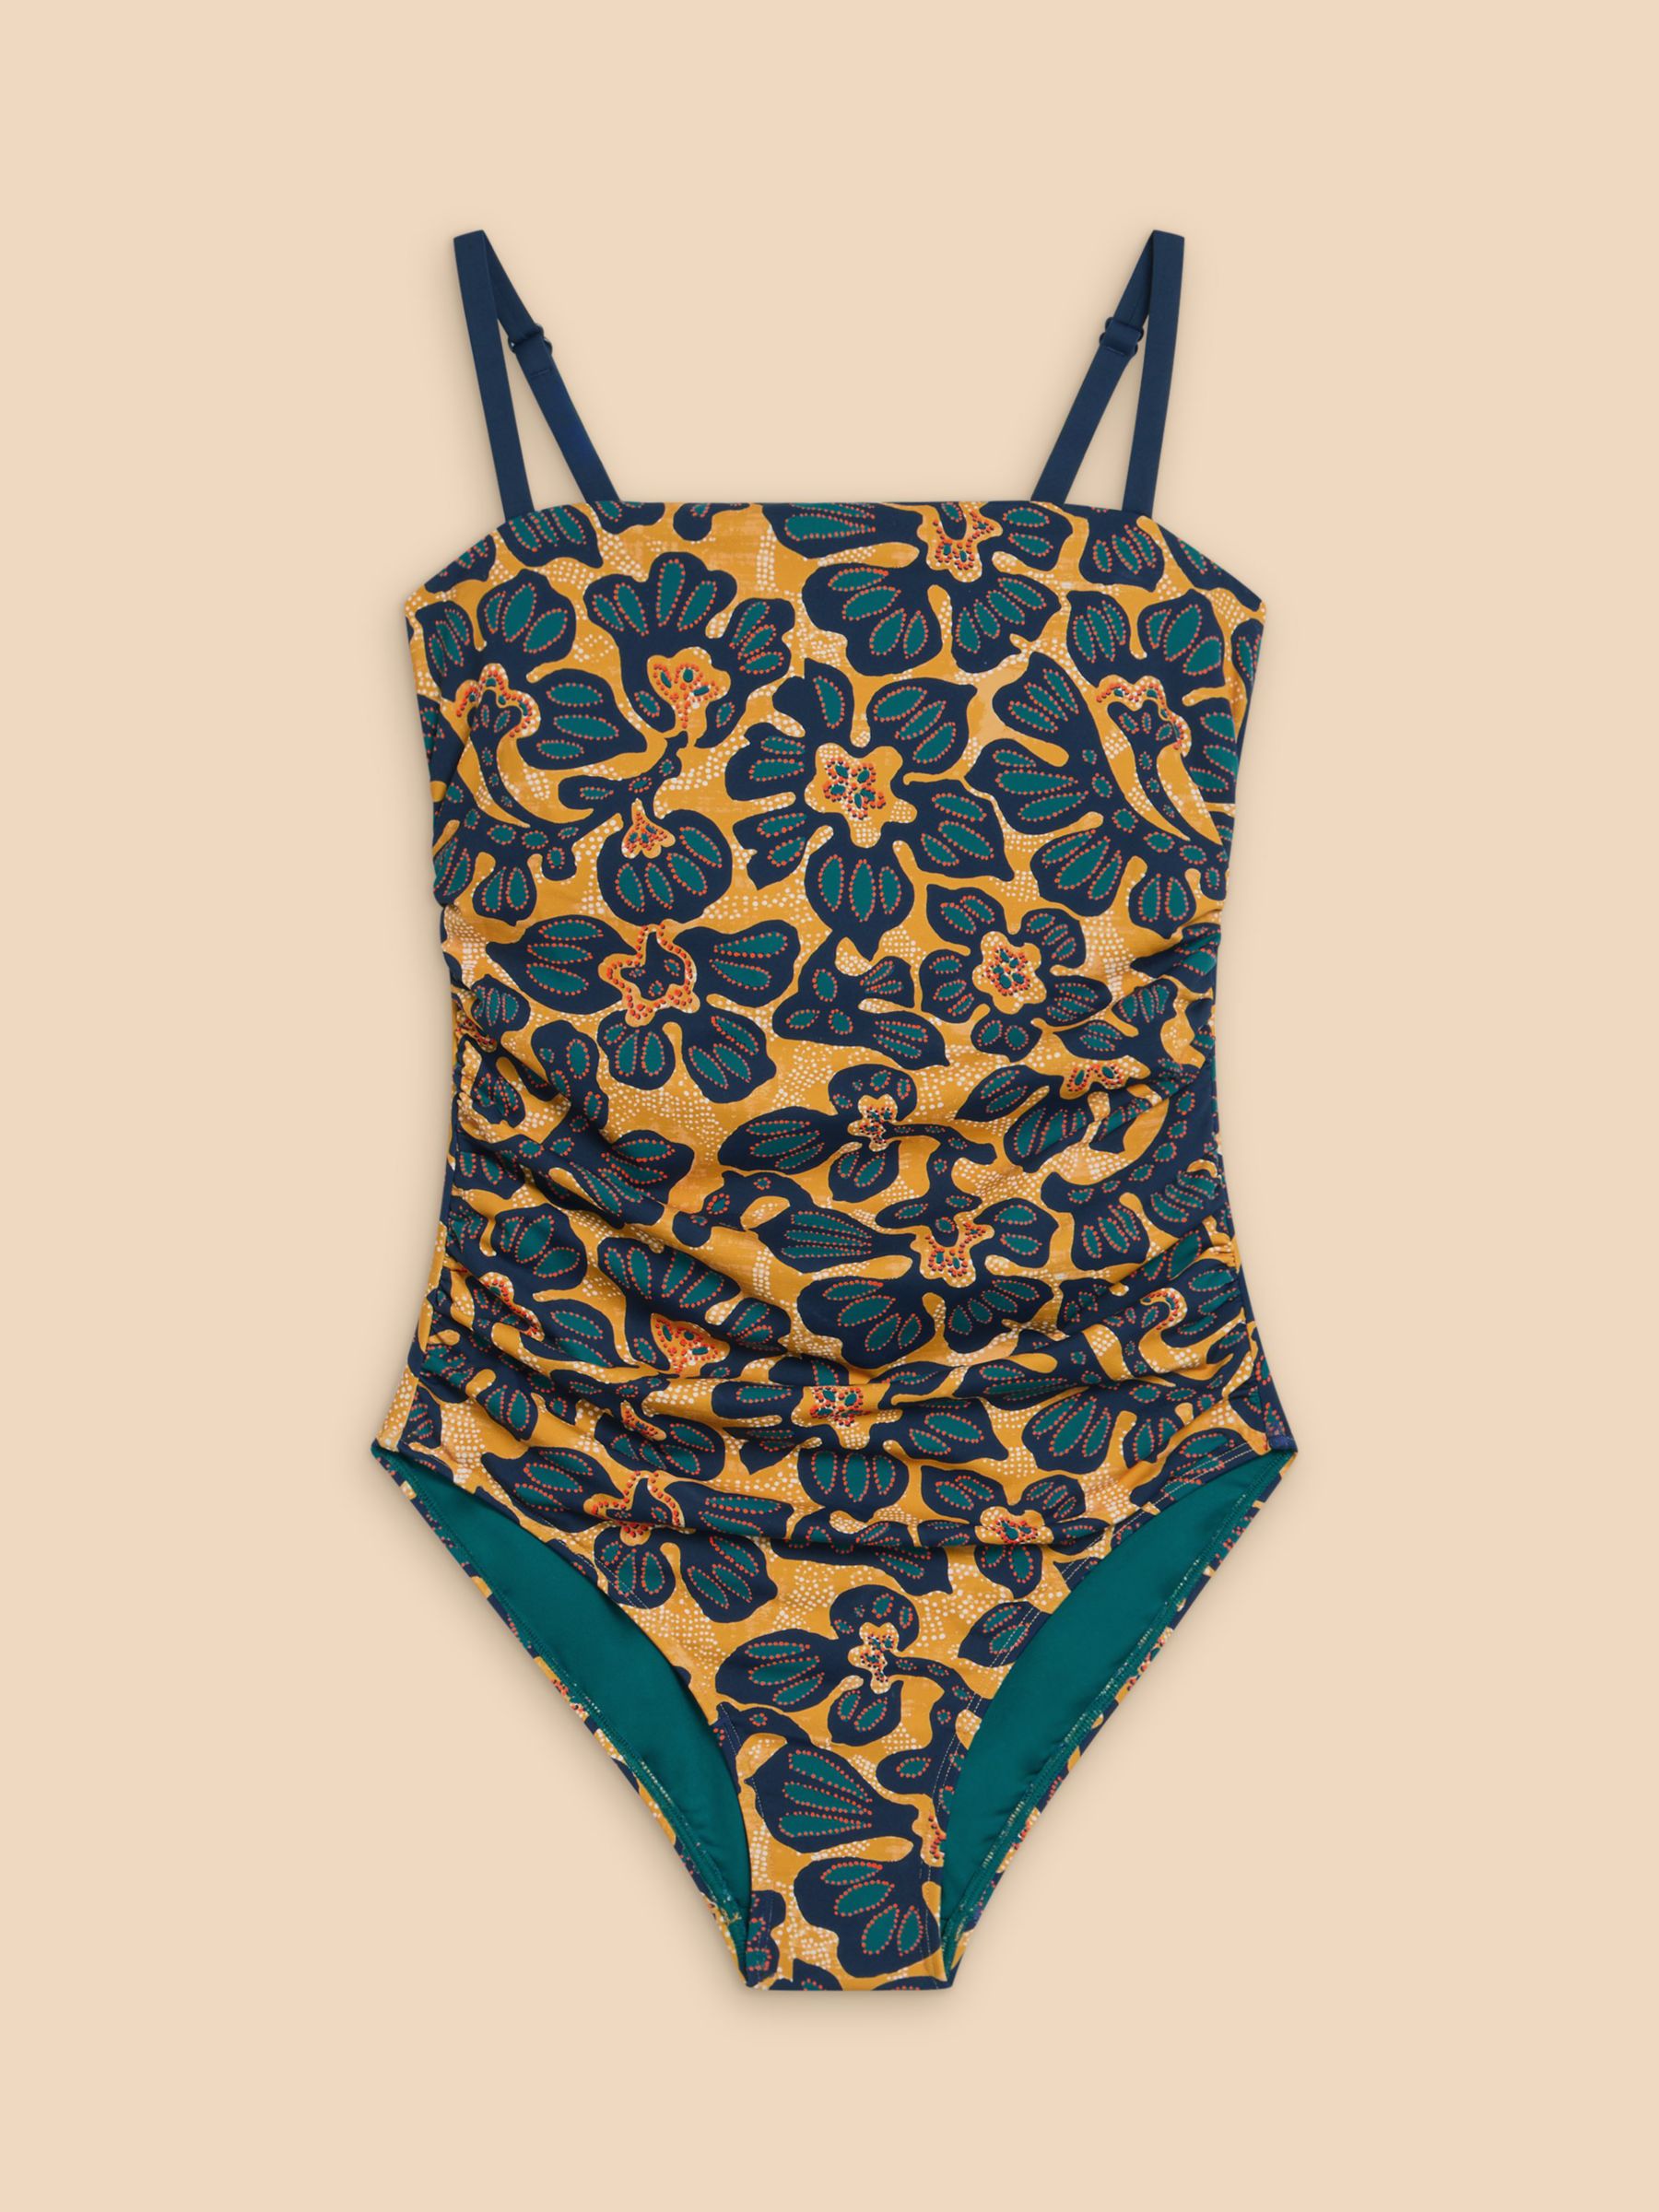 White Stuff Verity Ruched Swimsuit, Yellow/Multi at John Lewis & Partners